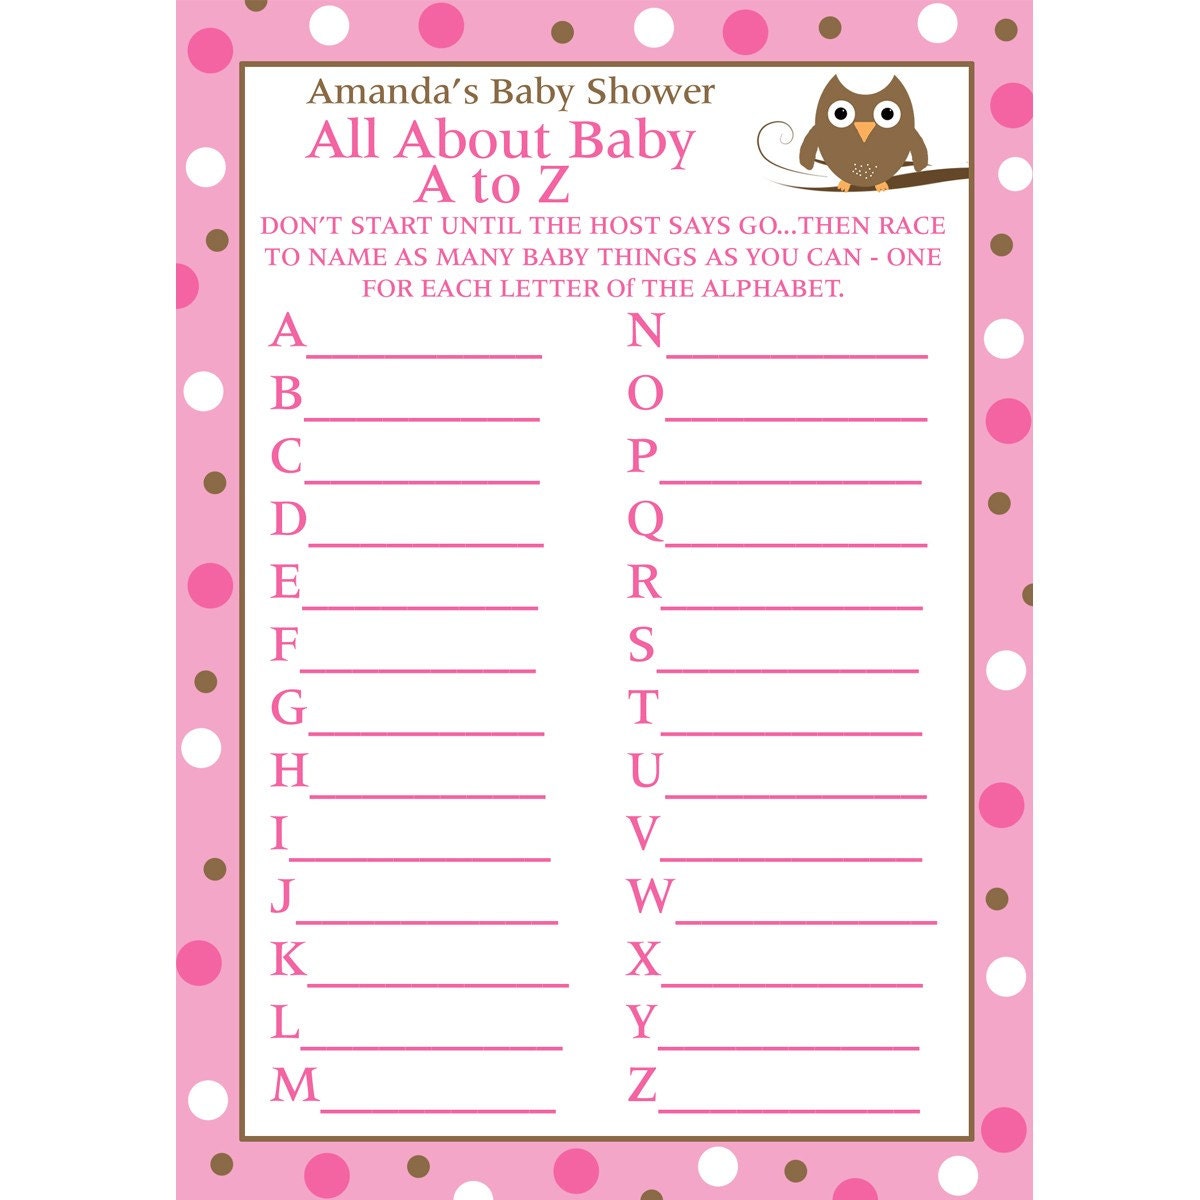 24 Personalized Baby Shower Advice Cards PINK RUBBER DUCKY 